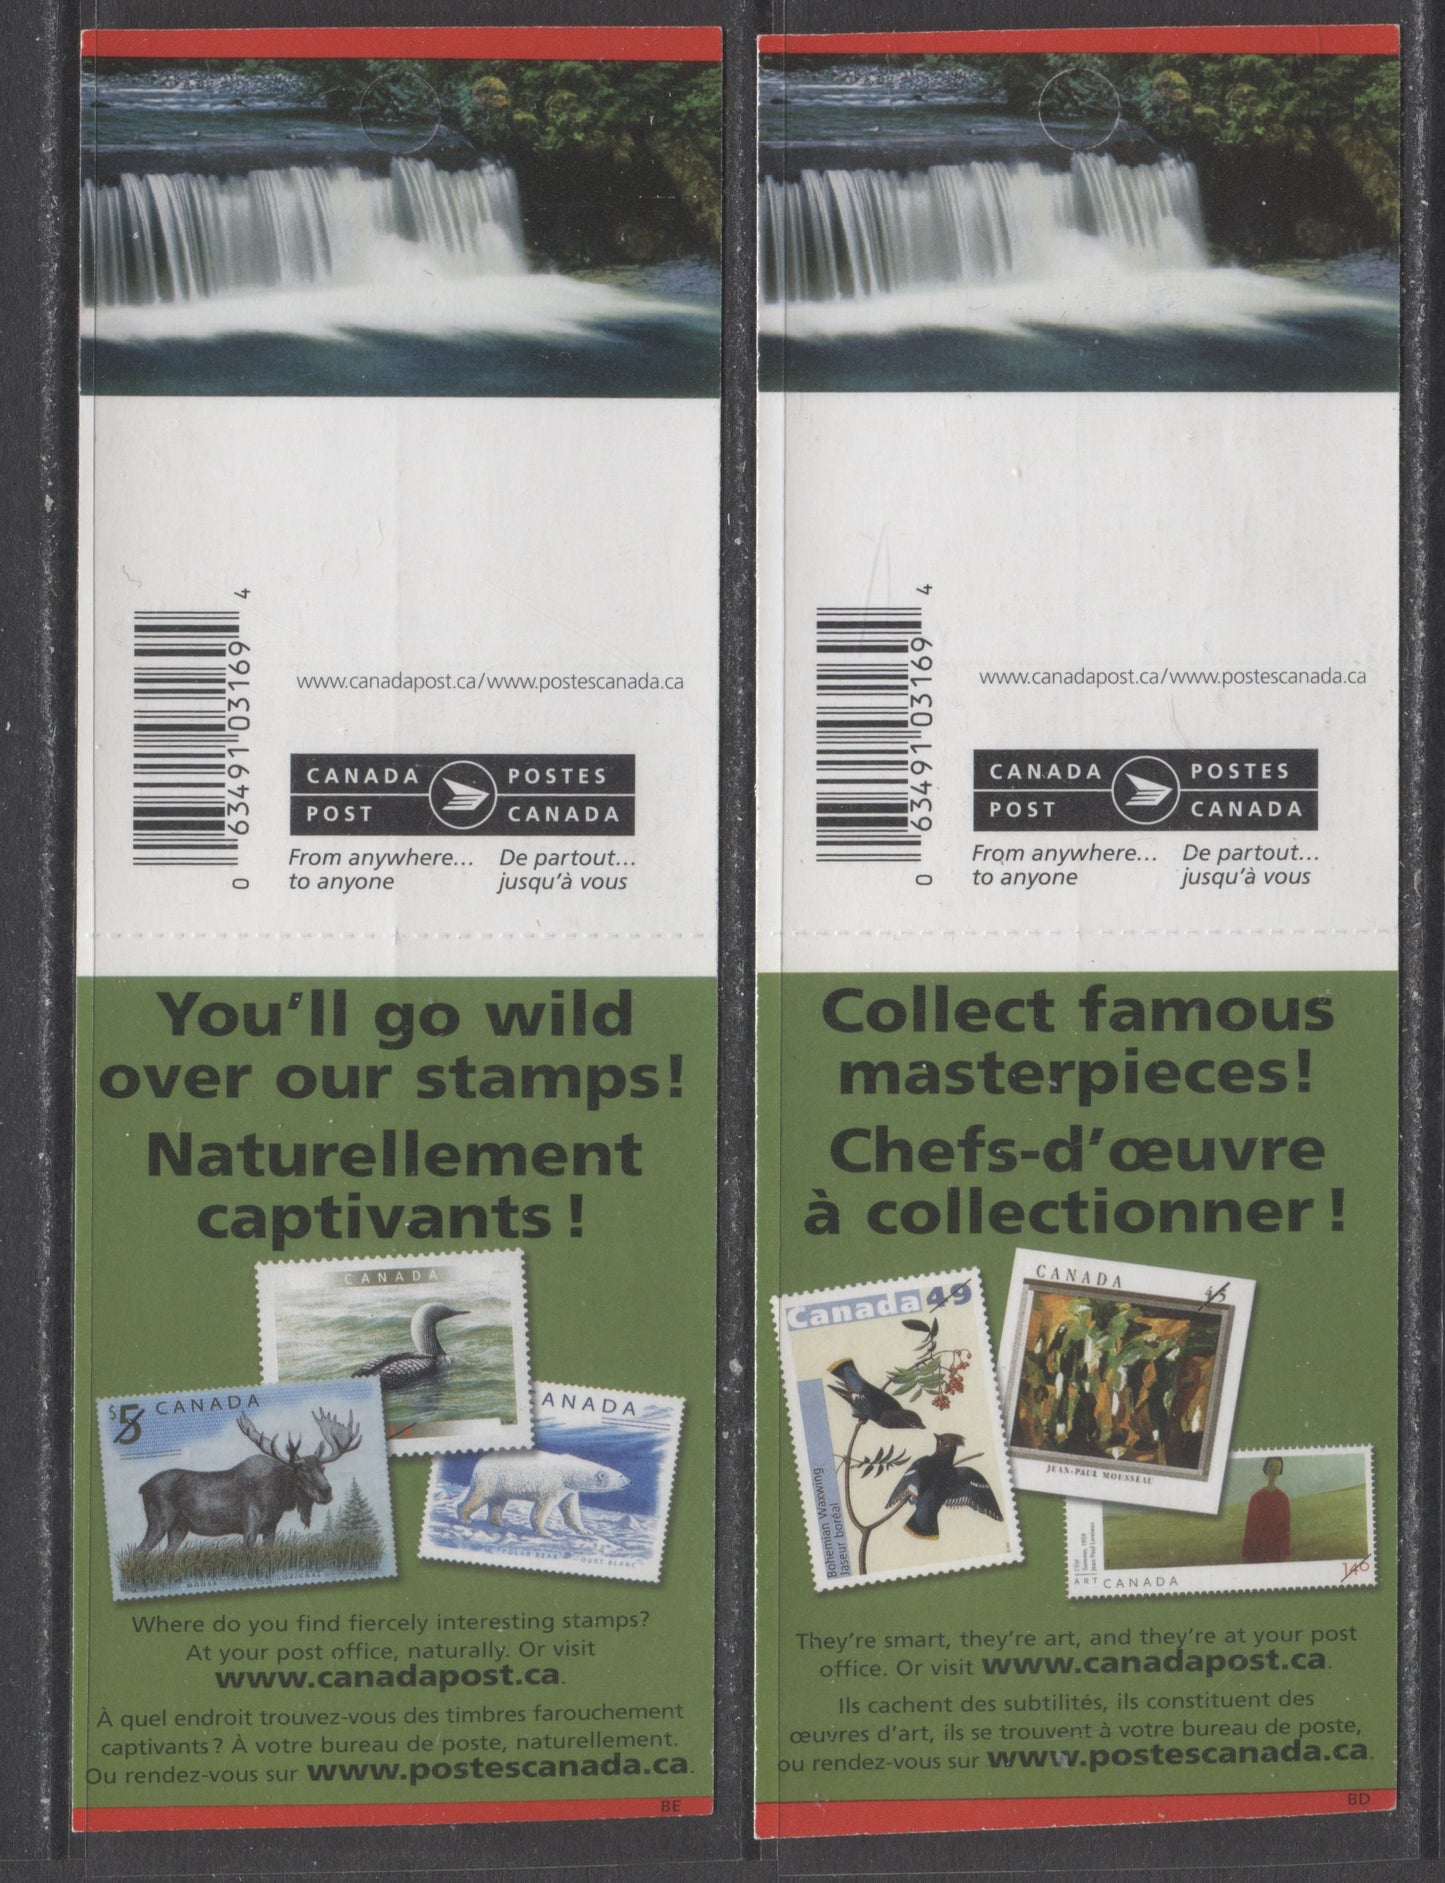 Lot 29 Canada #BK302b 50c Multicolored Flags Over Scenes, 2004-2005 Definitive Issues, 2 VFNH Booklets Of 10 With BD & BE Covers, Narrow Roulette, 29 Slits Per Pane. TRC Paper With HB Cover And Weaker Tagging $24